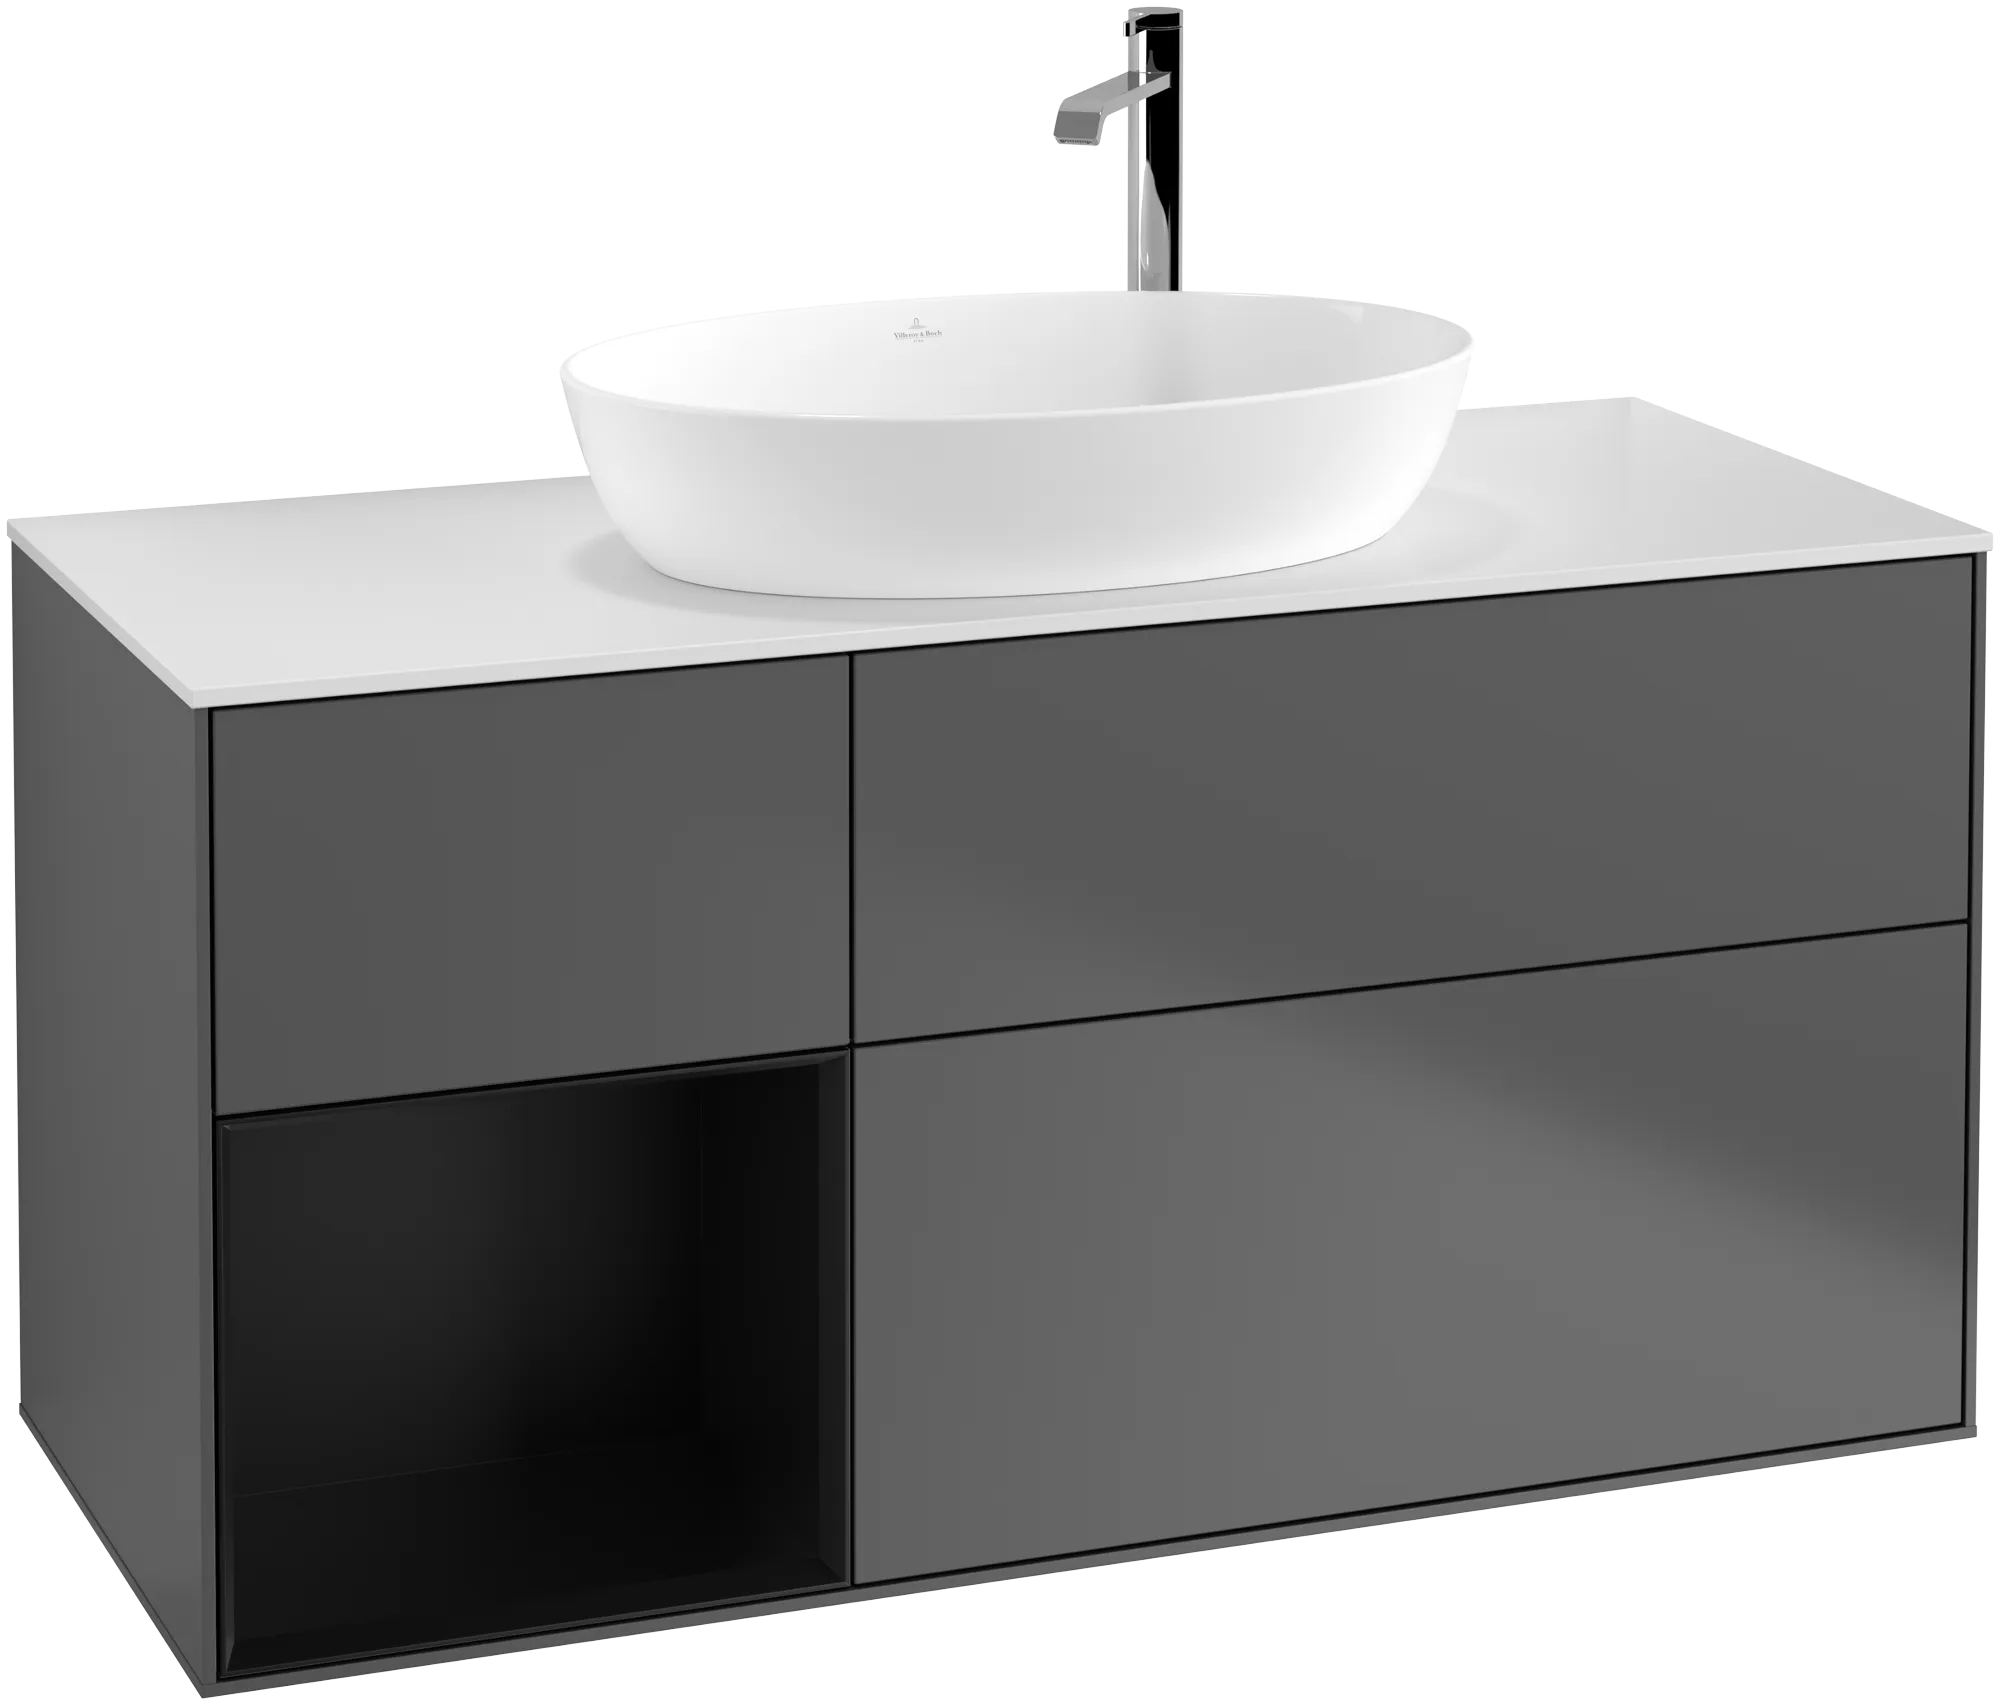 VILLEROY BOCH Finion Vanity unit, with lighting, 3 pull-out compartments, 1200 x 603 x 501 mm, Anthracite Matt Lacquer / Black Matt Lacquer / Glass White Matt #G941PDGK resmi